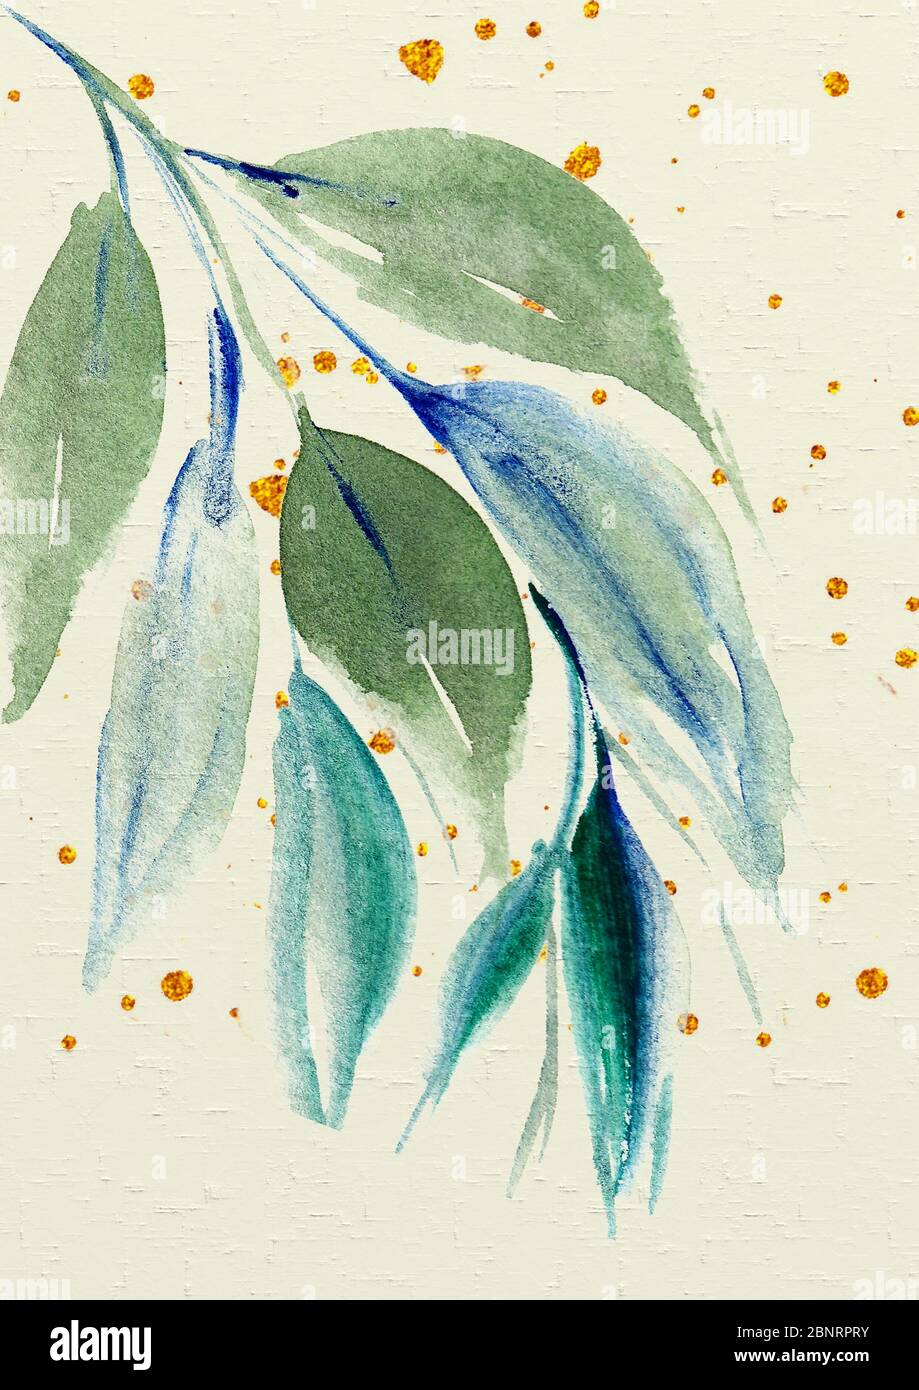 Watercolor illustration. Watercolor florals with golden splats. Hand drawn loose watercolor element. Good for greetings, wedding or invitation cards. Stock Photo